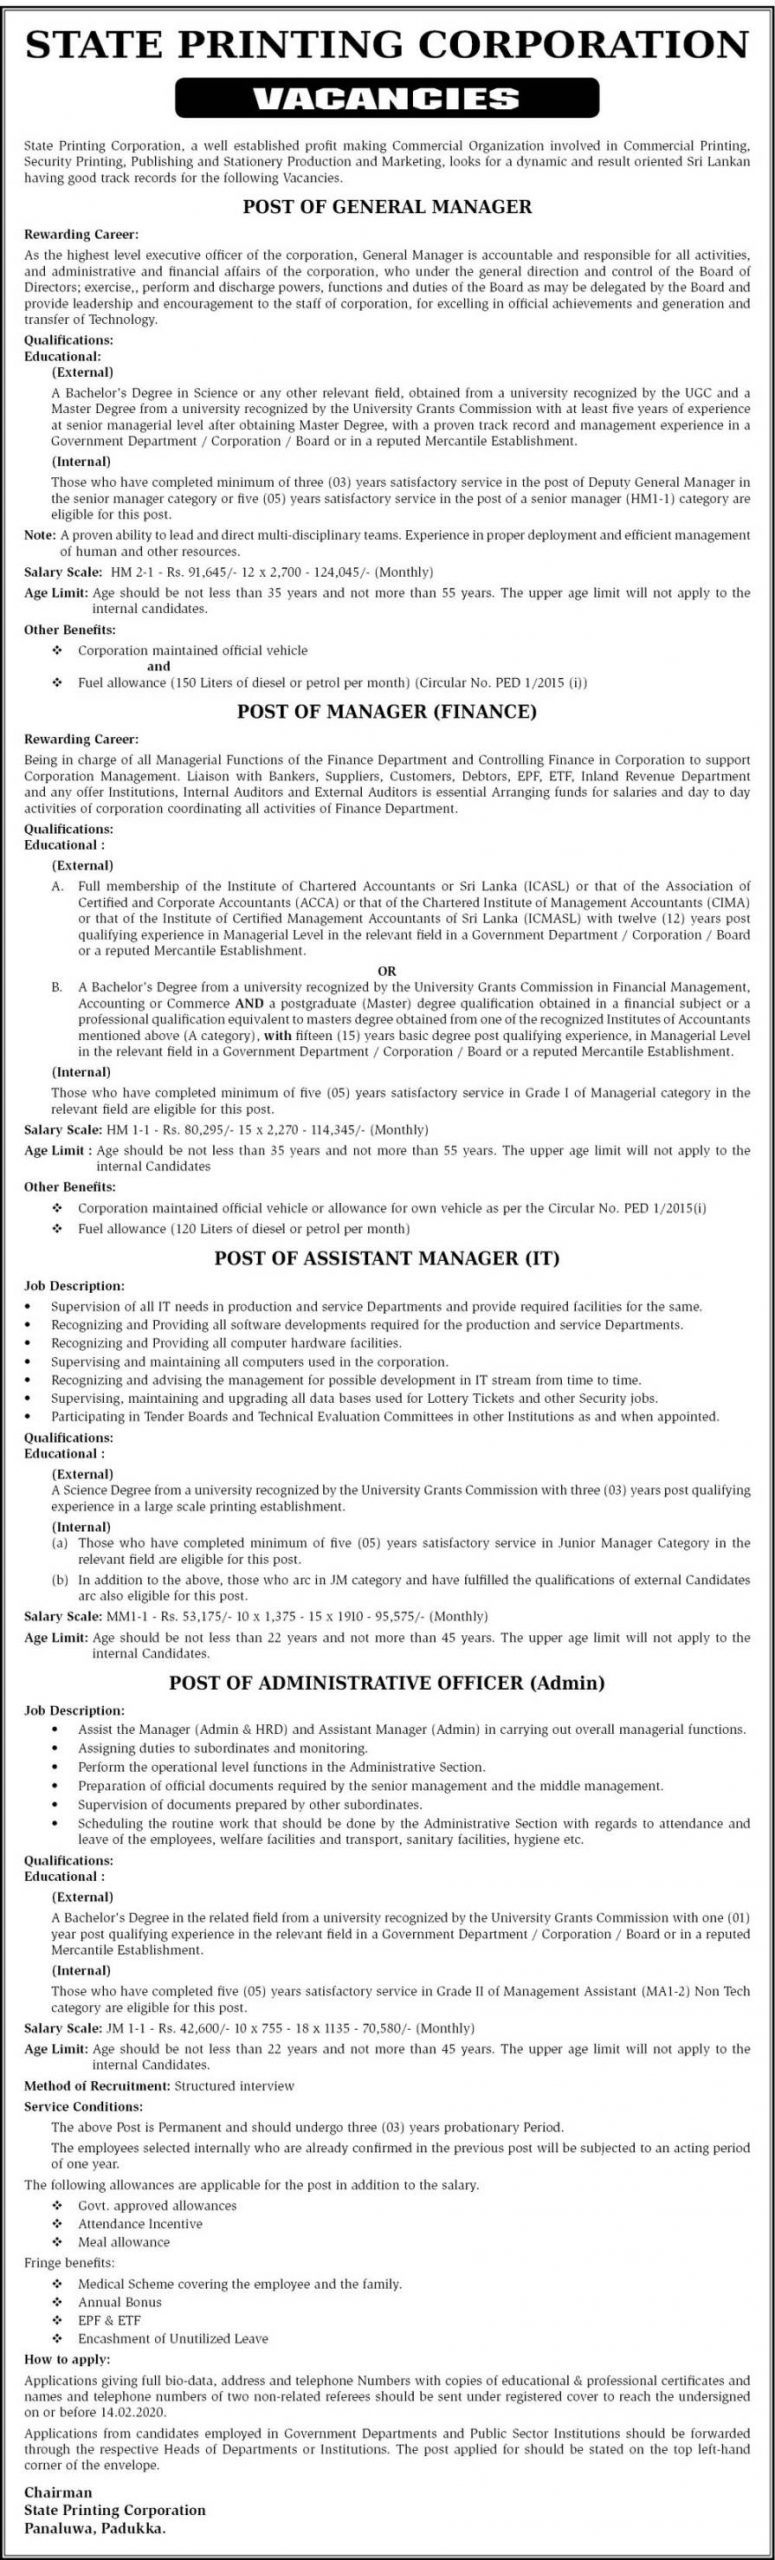 General Manager, Manager (Finance), Assistant Manager (IT), Administrative Officer (Admin) – State Printing Corporation 2020